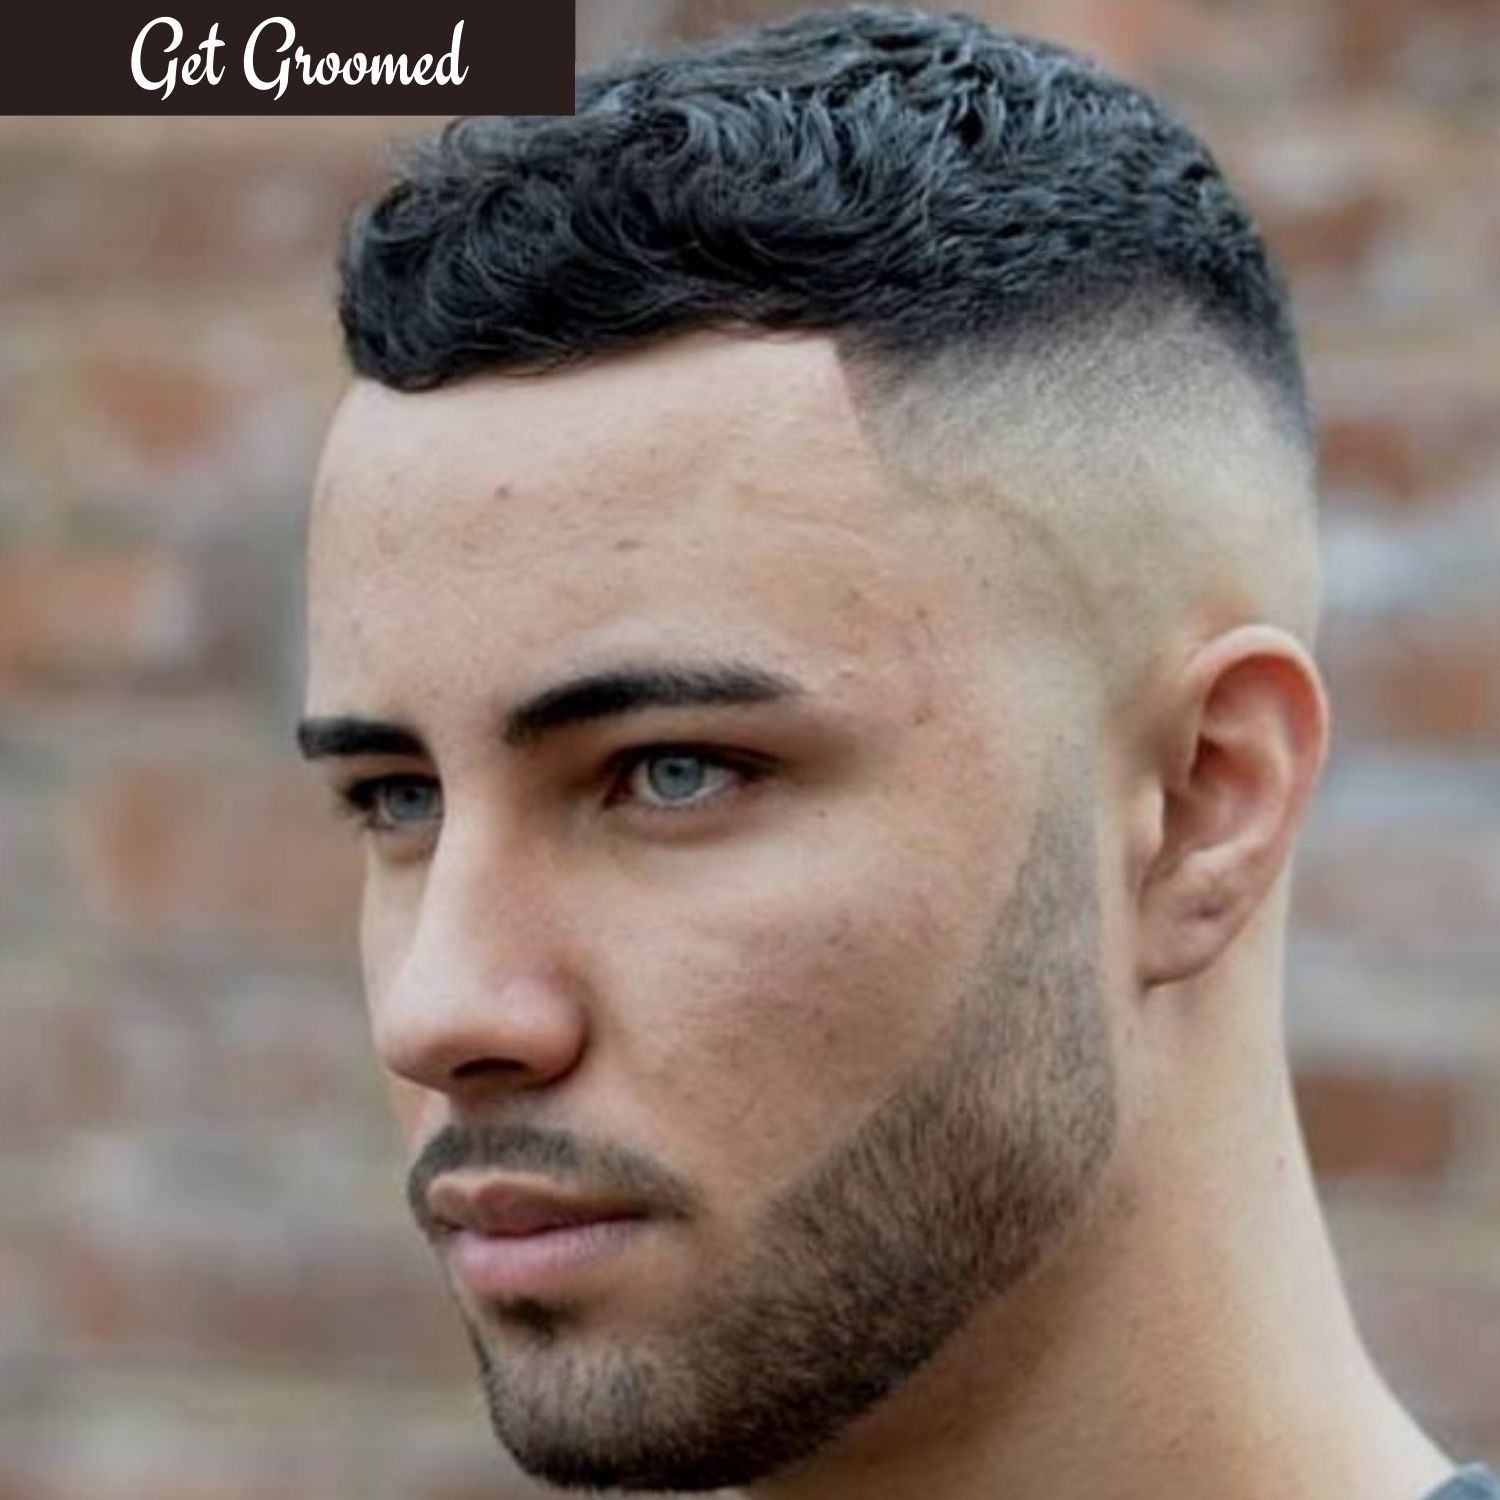 100 On Trend Men's Haircuts Names and Pictures 2023